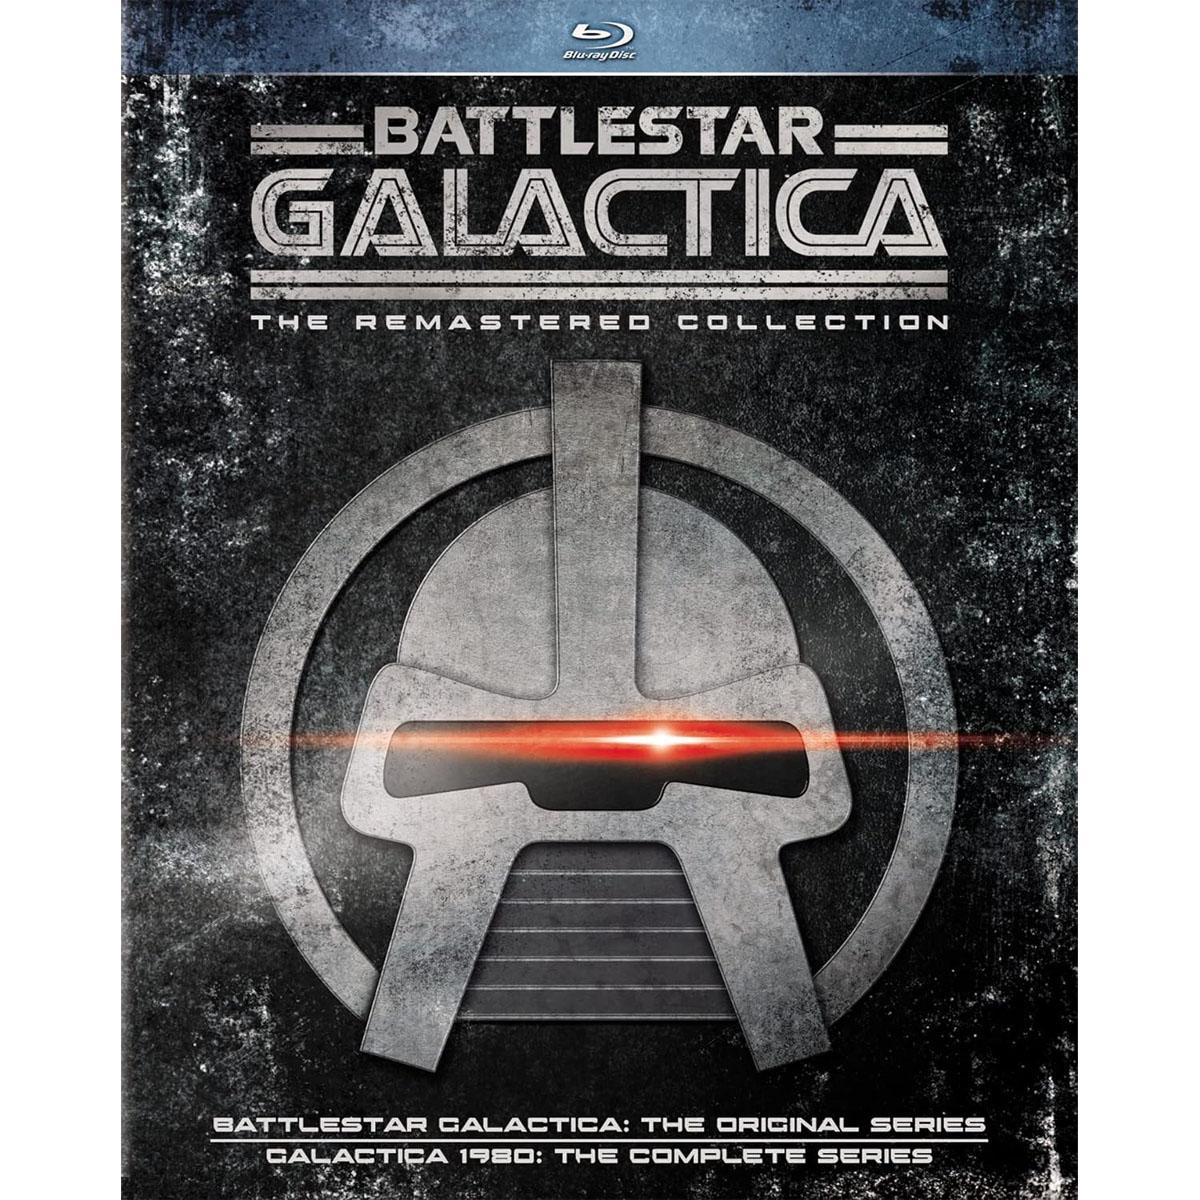 Battlestar Galactica The Remastered Collection Blu-ray for $29.99